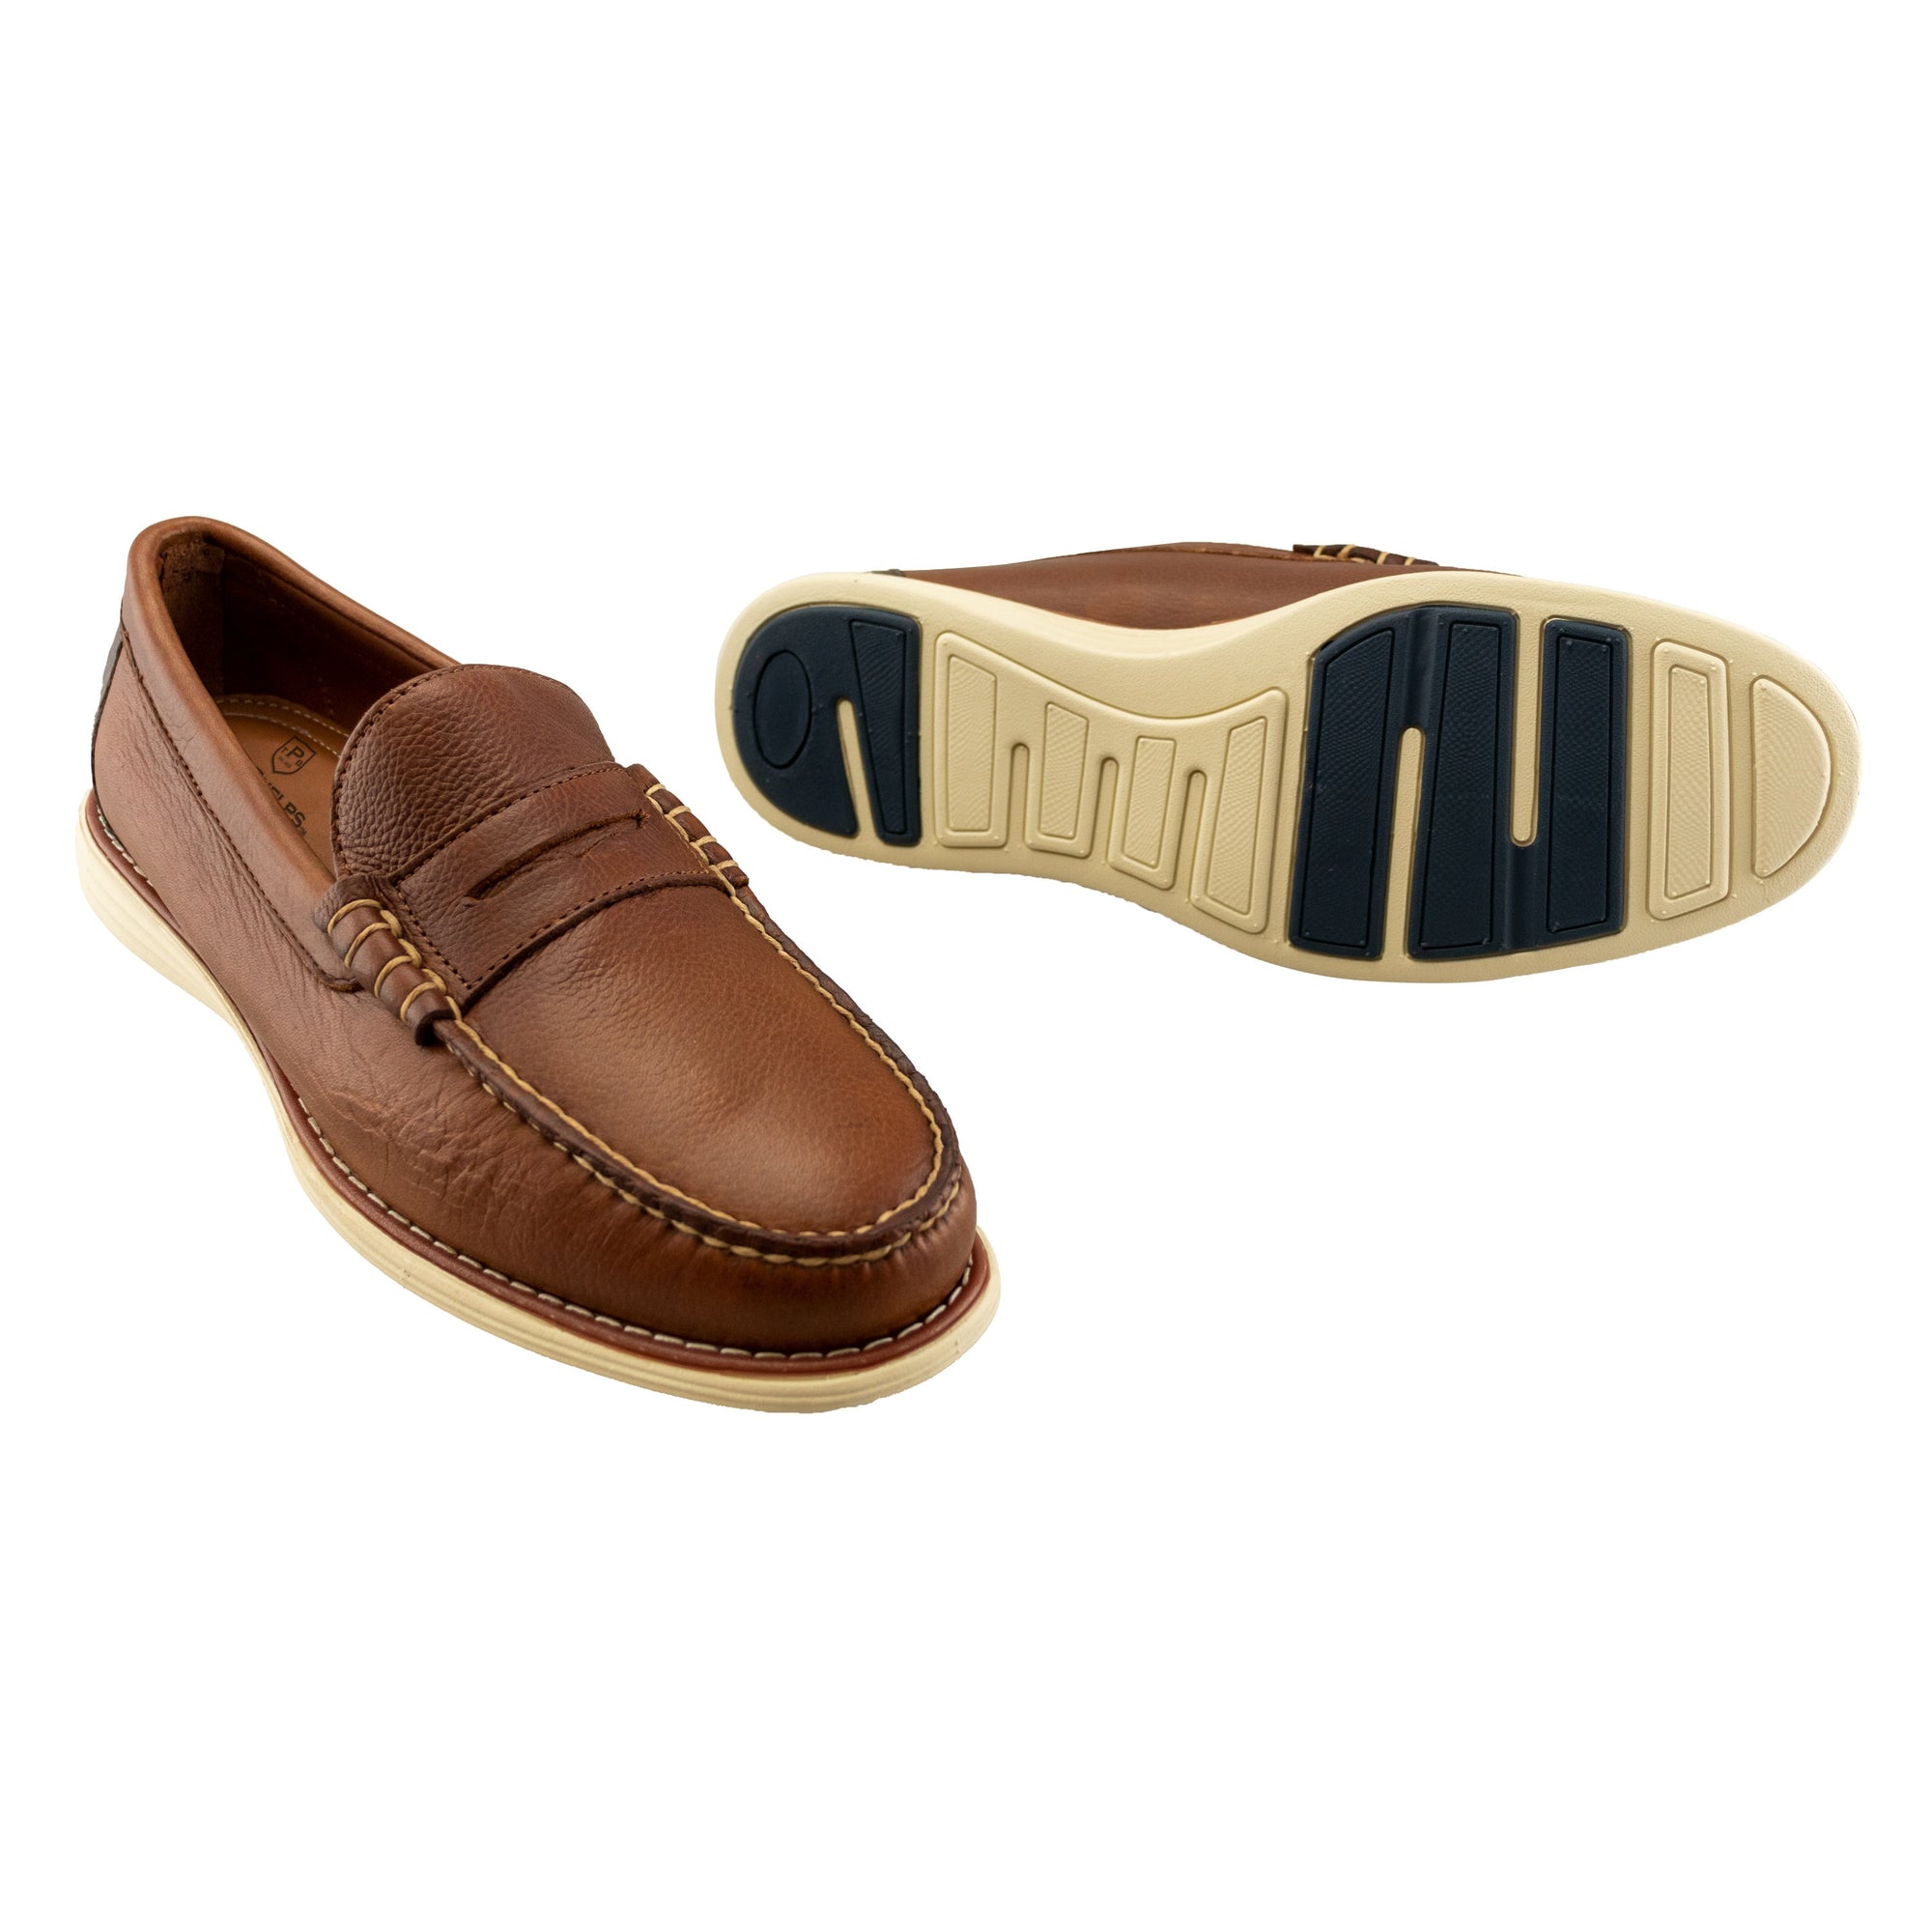 Freeport Signature Penny Loafer, Men's Loafers